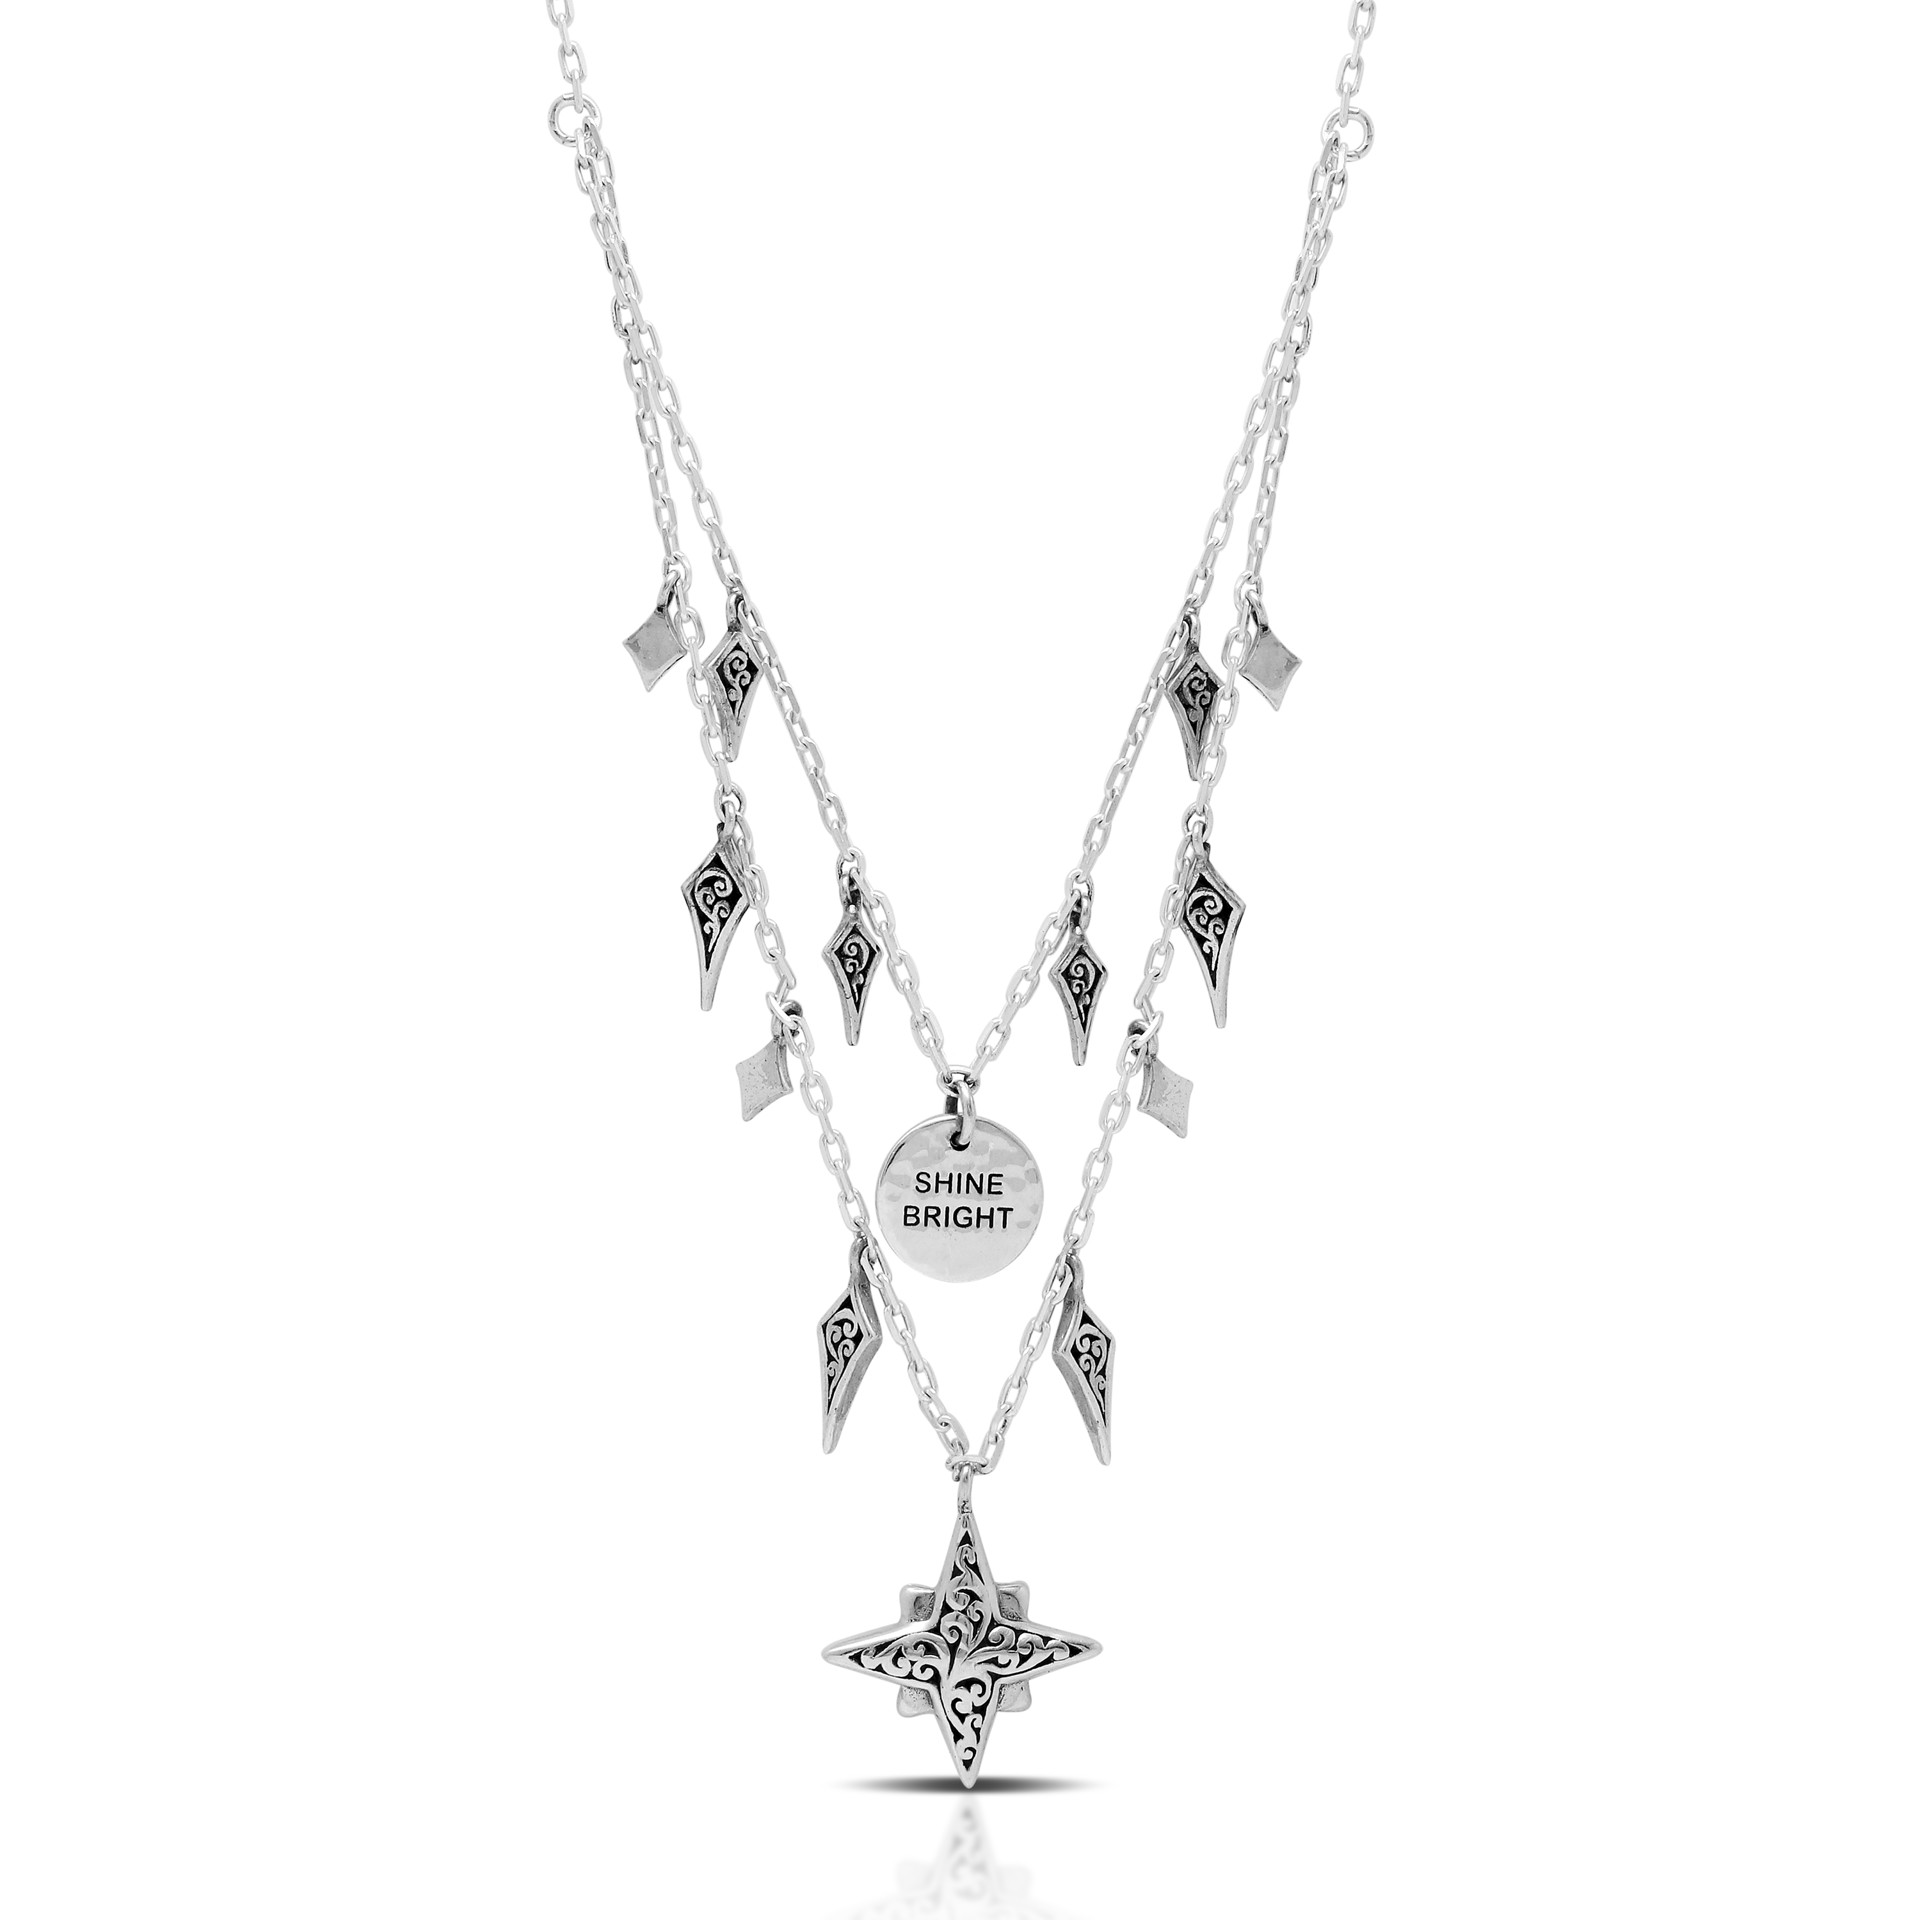 9758 Sterling Silver Layered Star Necklace with "Shine Bright" Pendant by Lois Hill